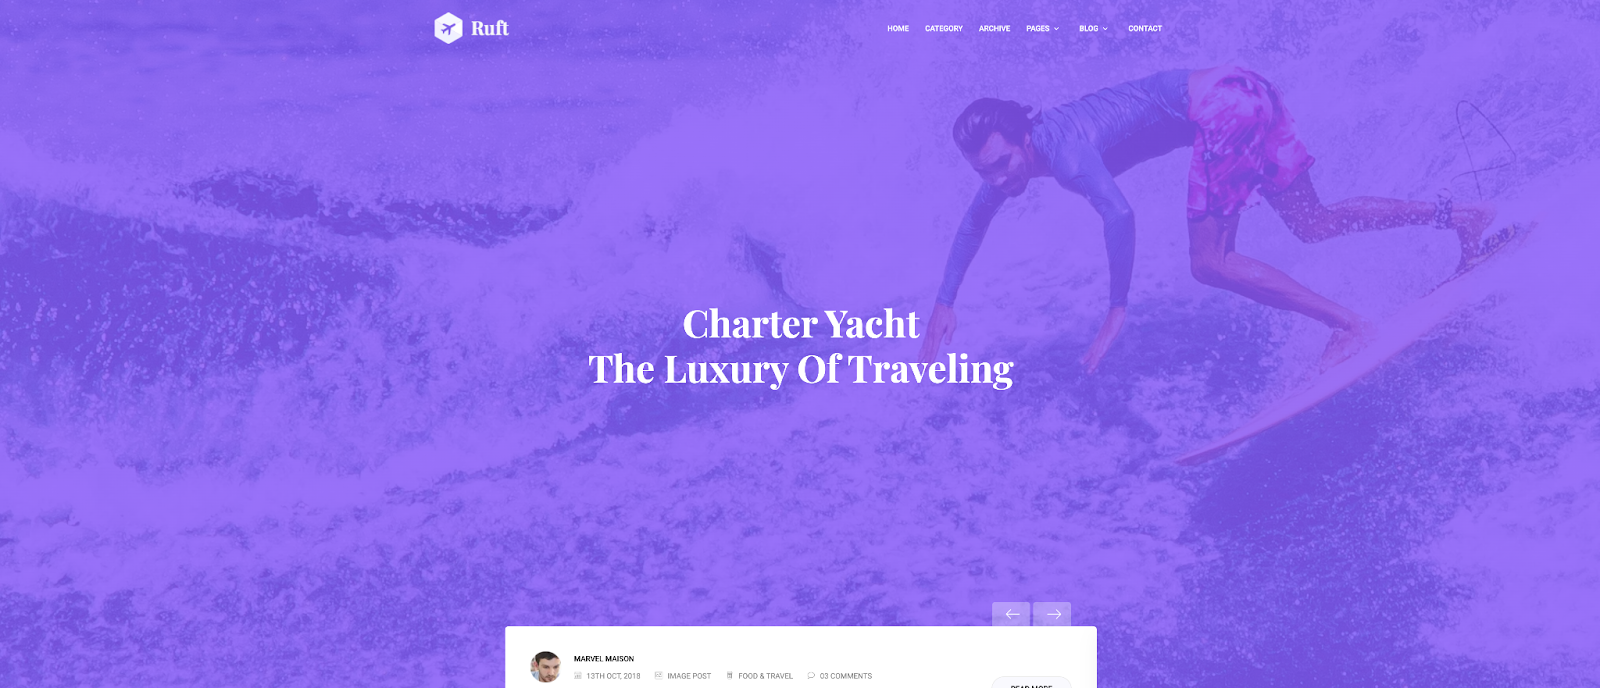 Get the Ruft website theme for your next blog project and head off on adventure